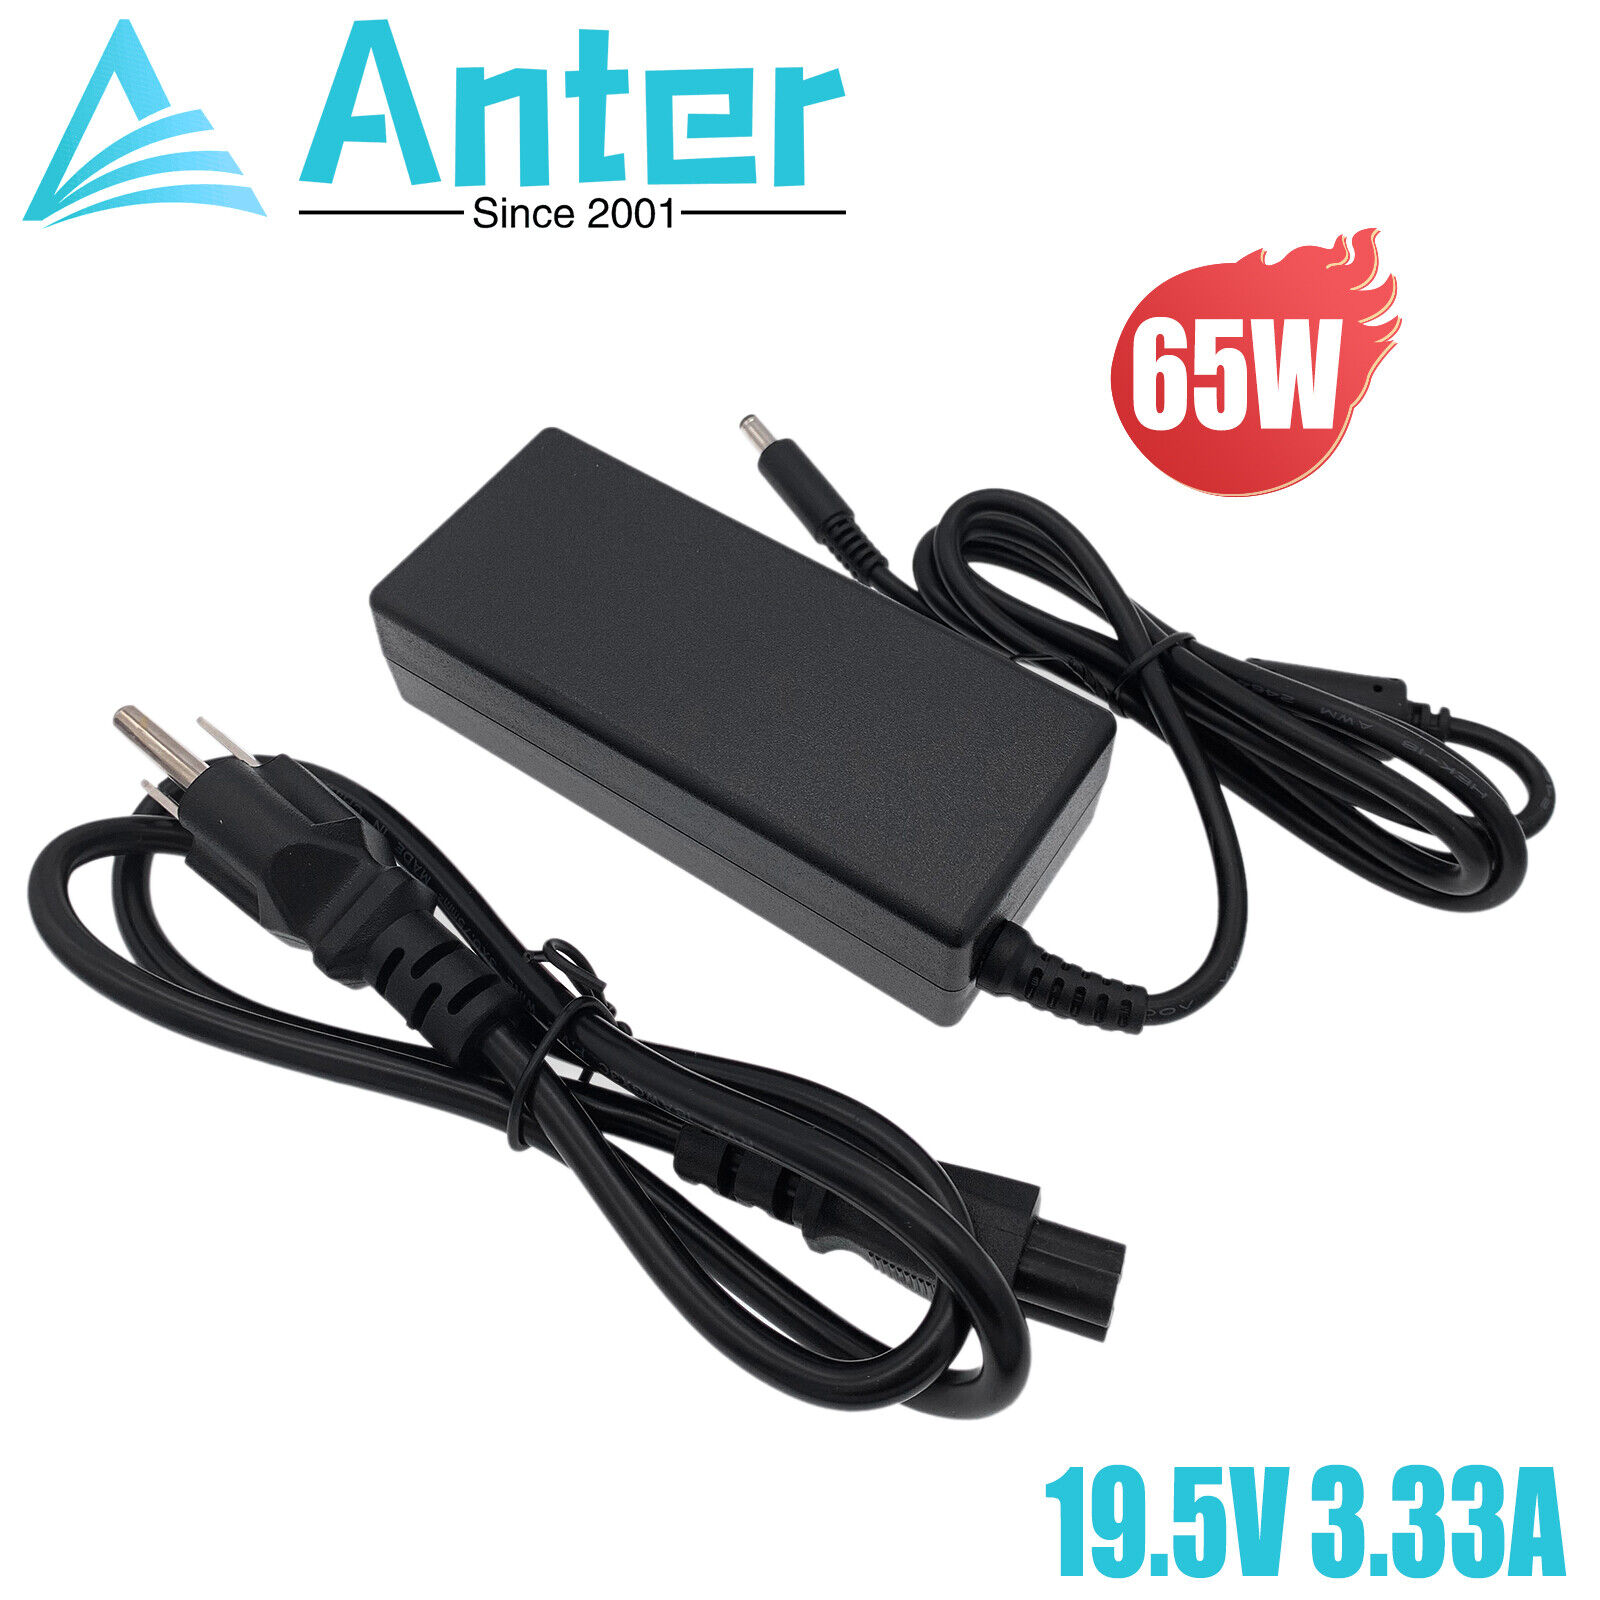 AC Adapter For HP 14-df0016ds 14-df0020nr 14-df0023cl Power Supply Cord Charger